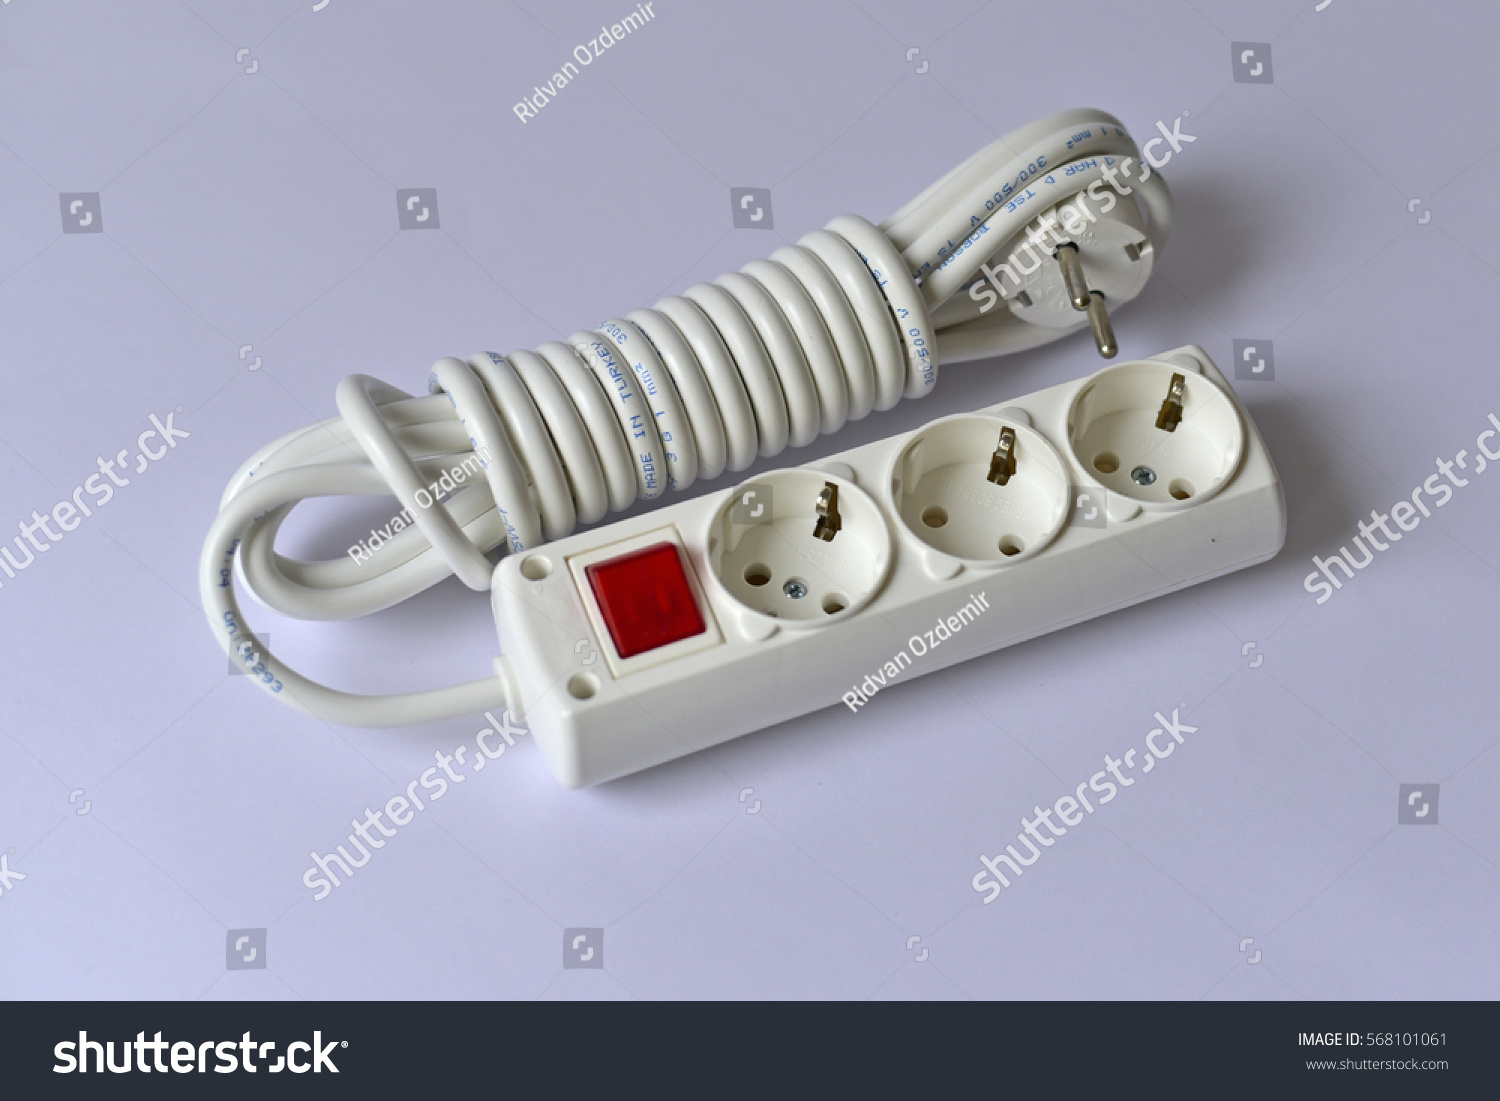 White extension cable with three plug socket and red switch #568101061